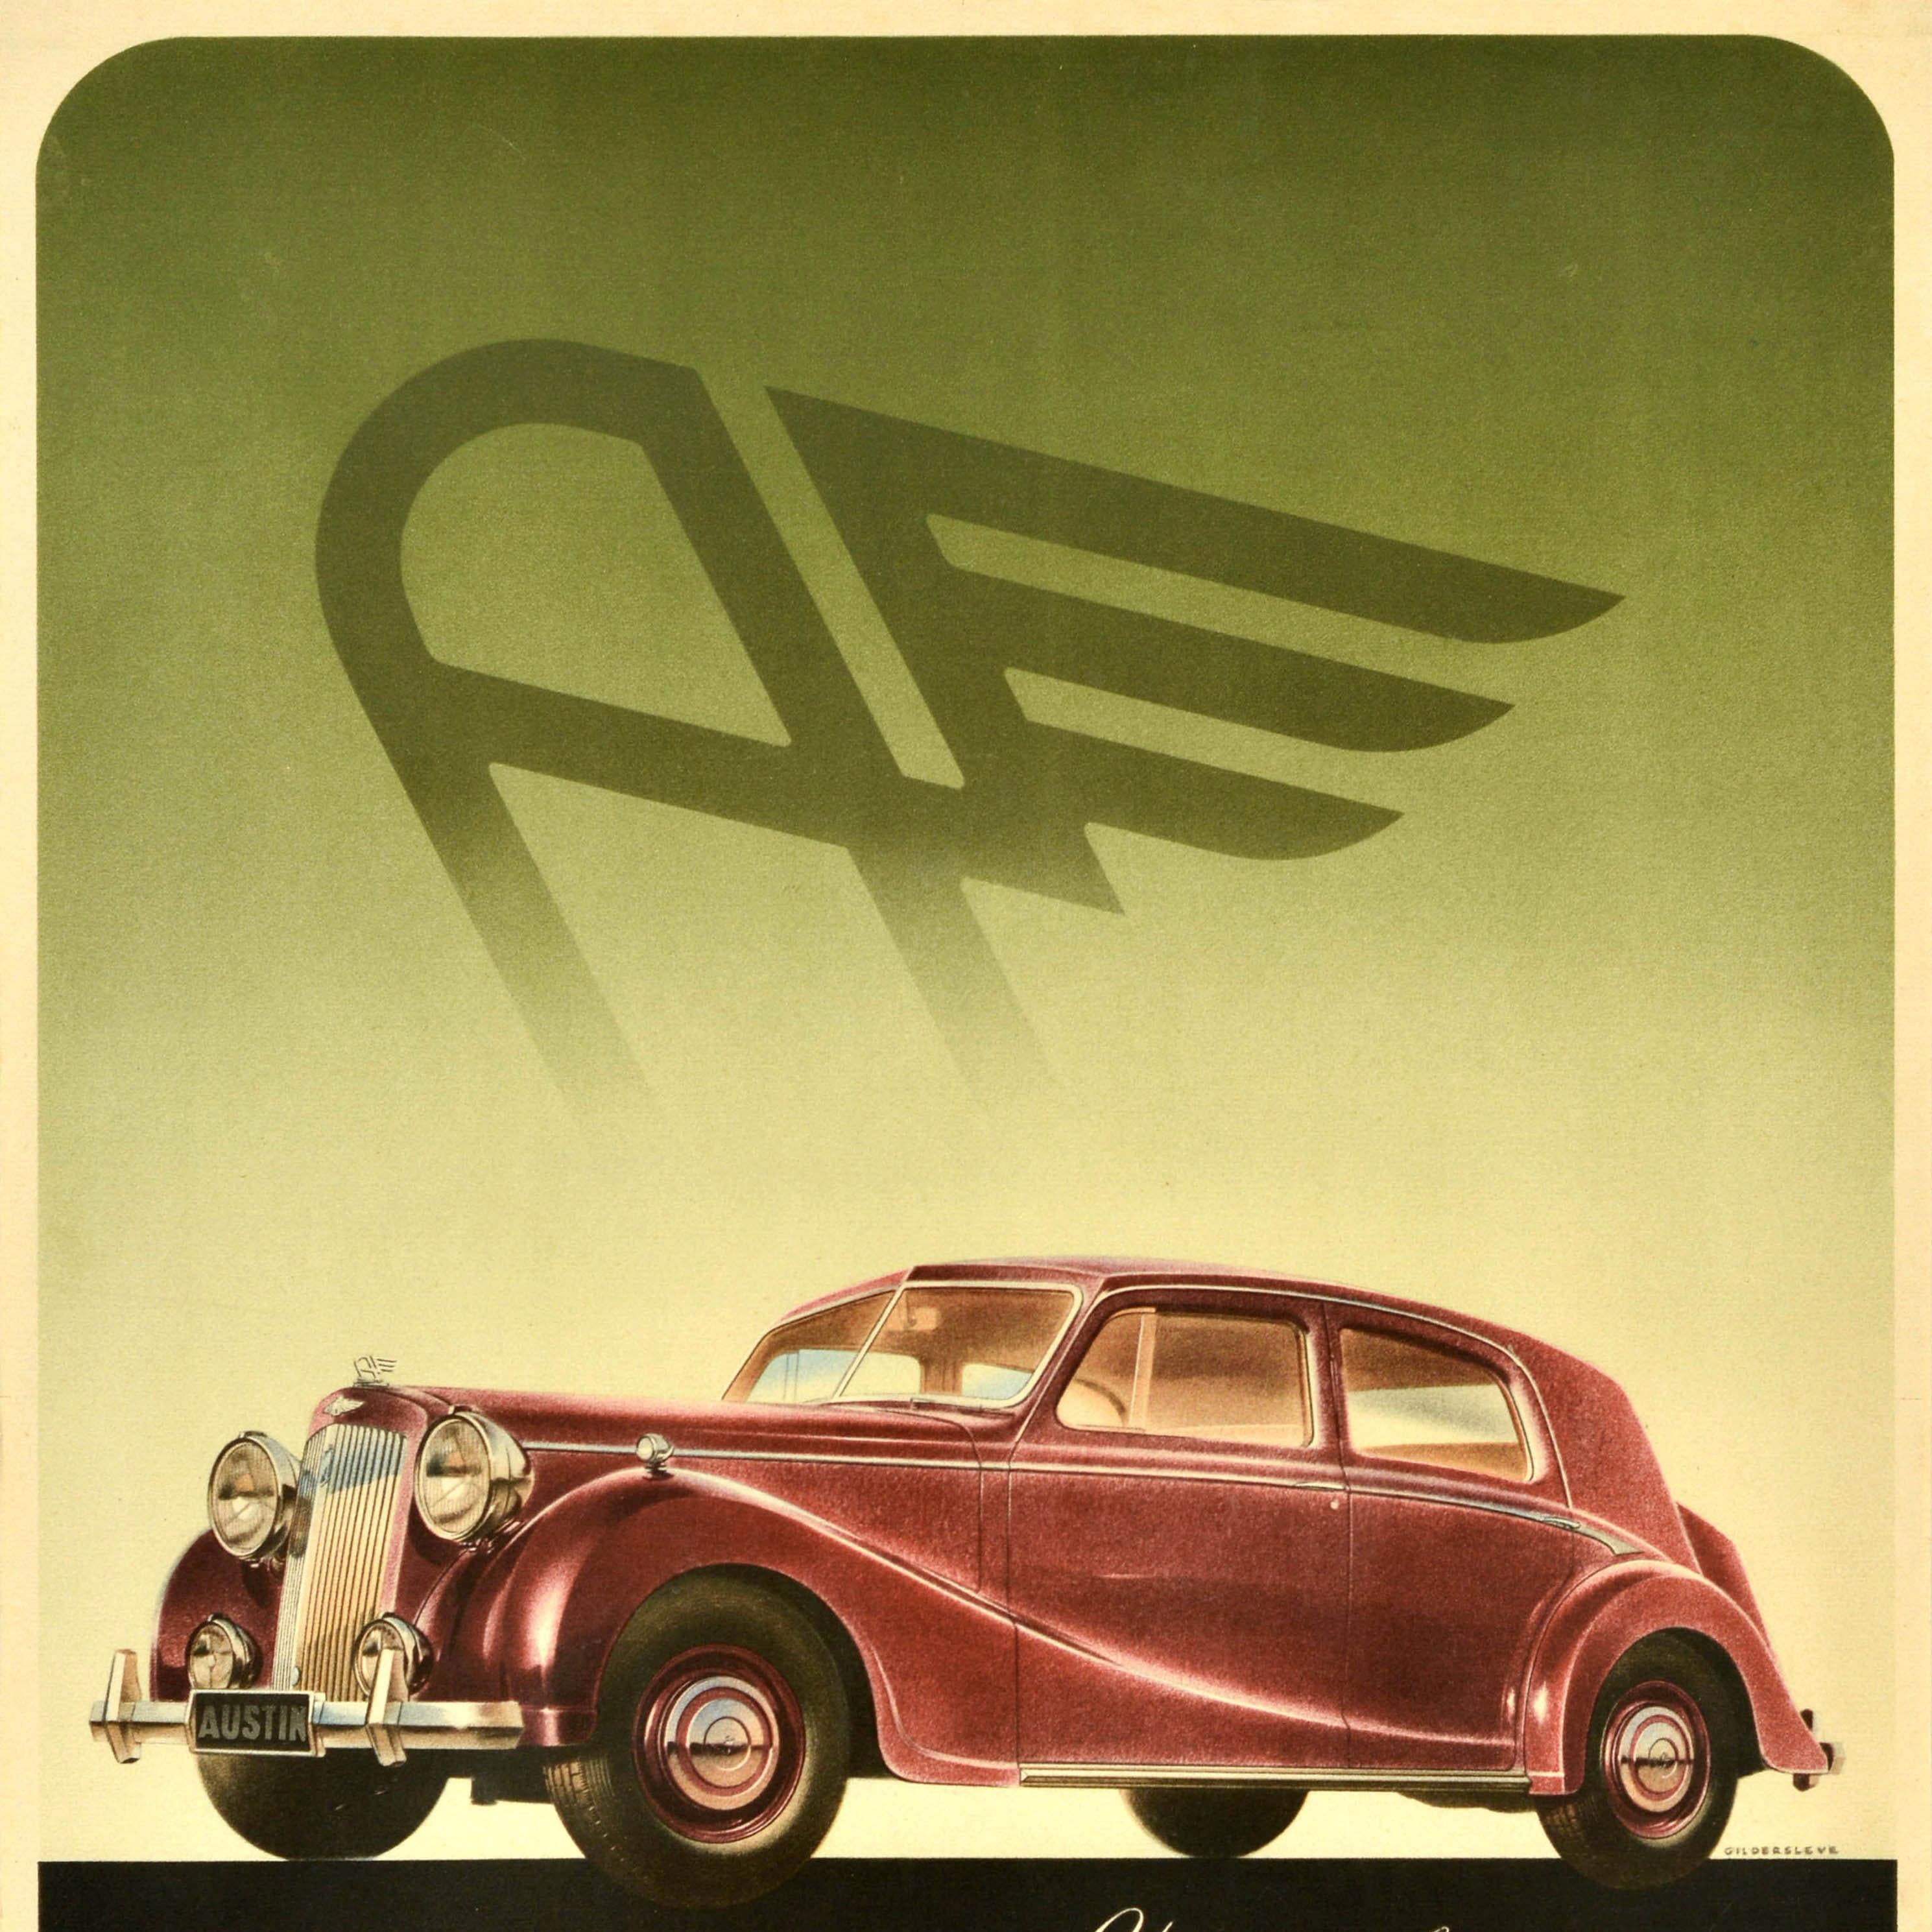 Original vintage car advertising poster for the new Austin 110 six cylinder styled in Sheerline featuring an illustration of a shiny red car in front of the winged A logo on a green shaded background, the bold text on the black background below. The